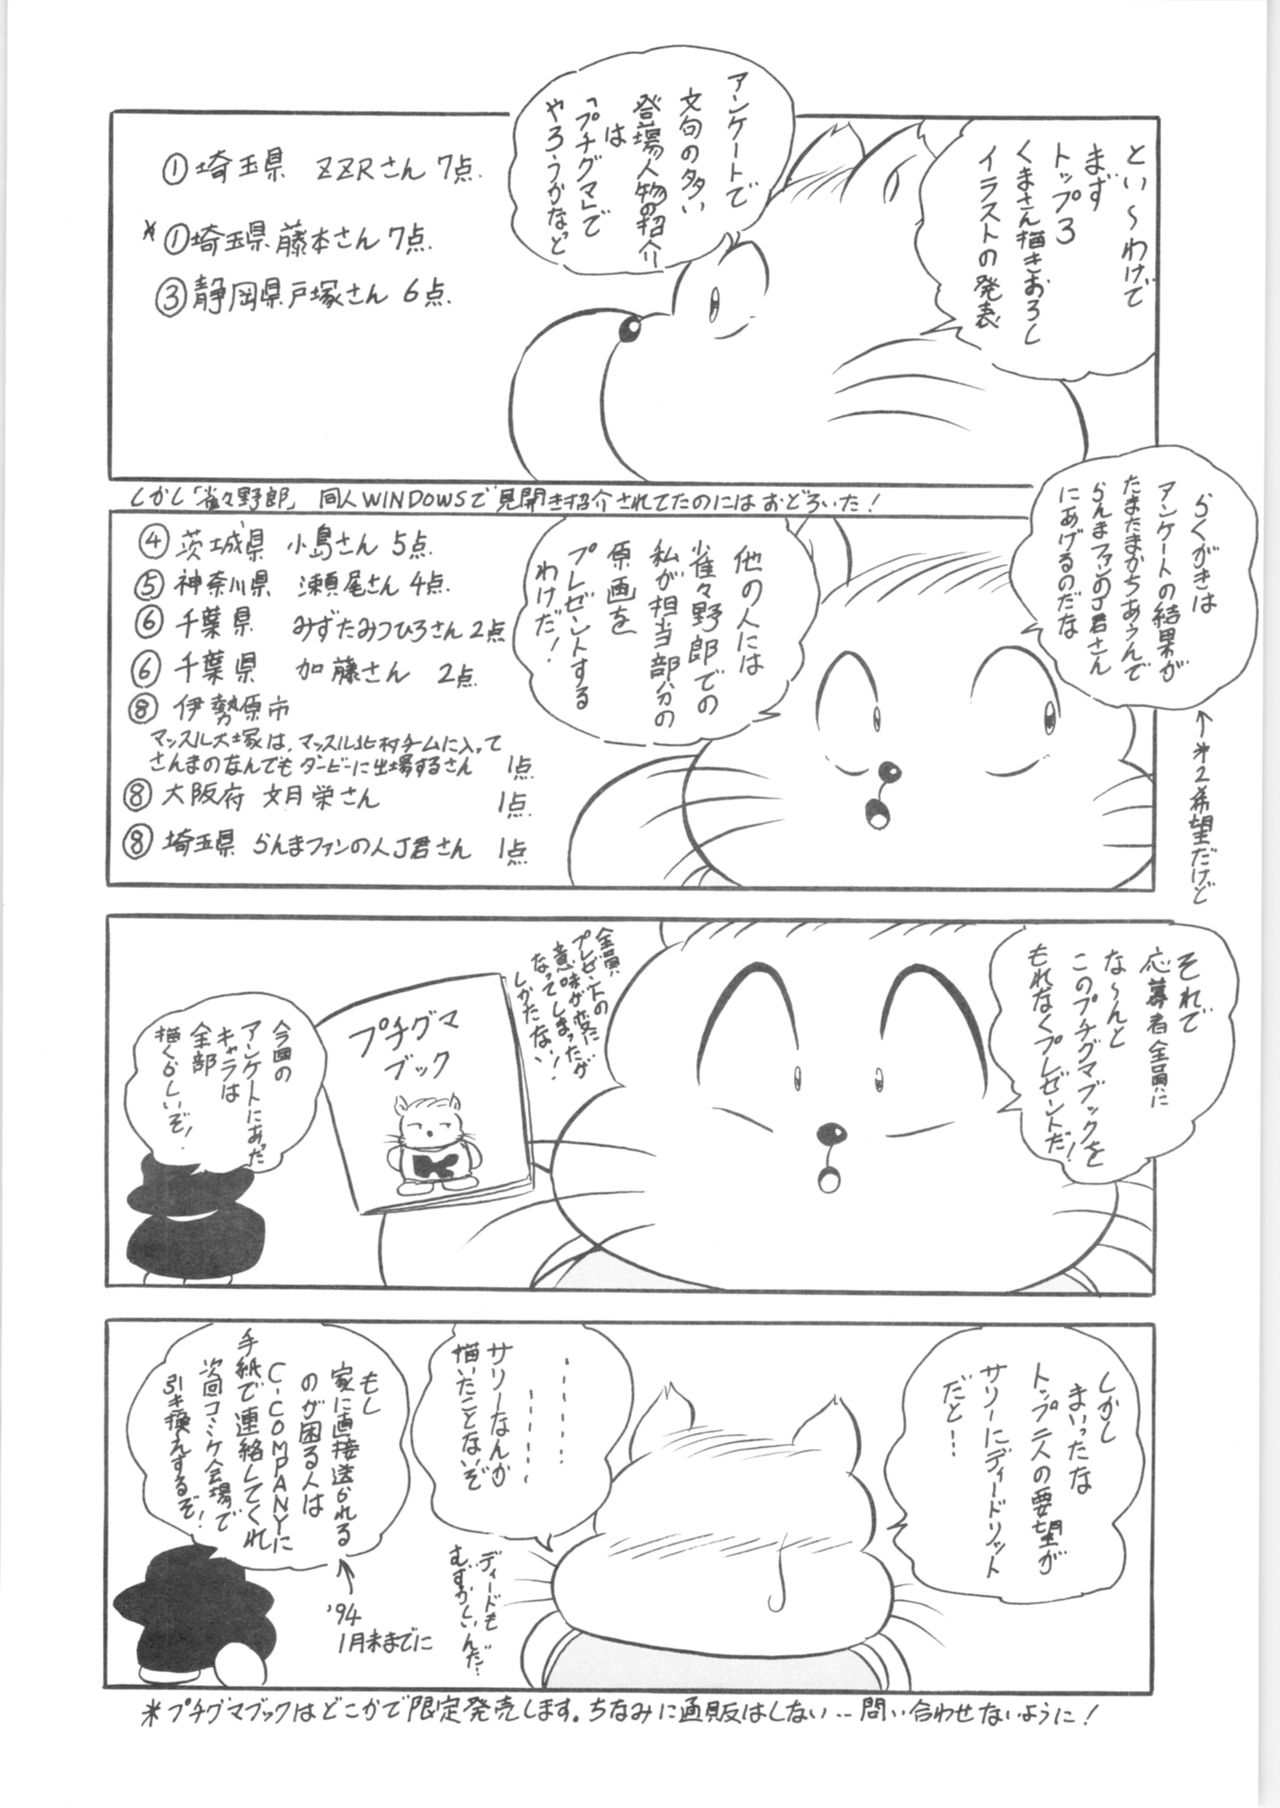 [C-COMPANY] C-COMPANY SPECIAL STAGE 13 (Ranma 1/2) page 41 full